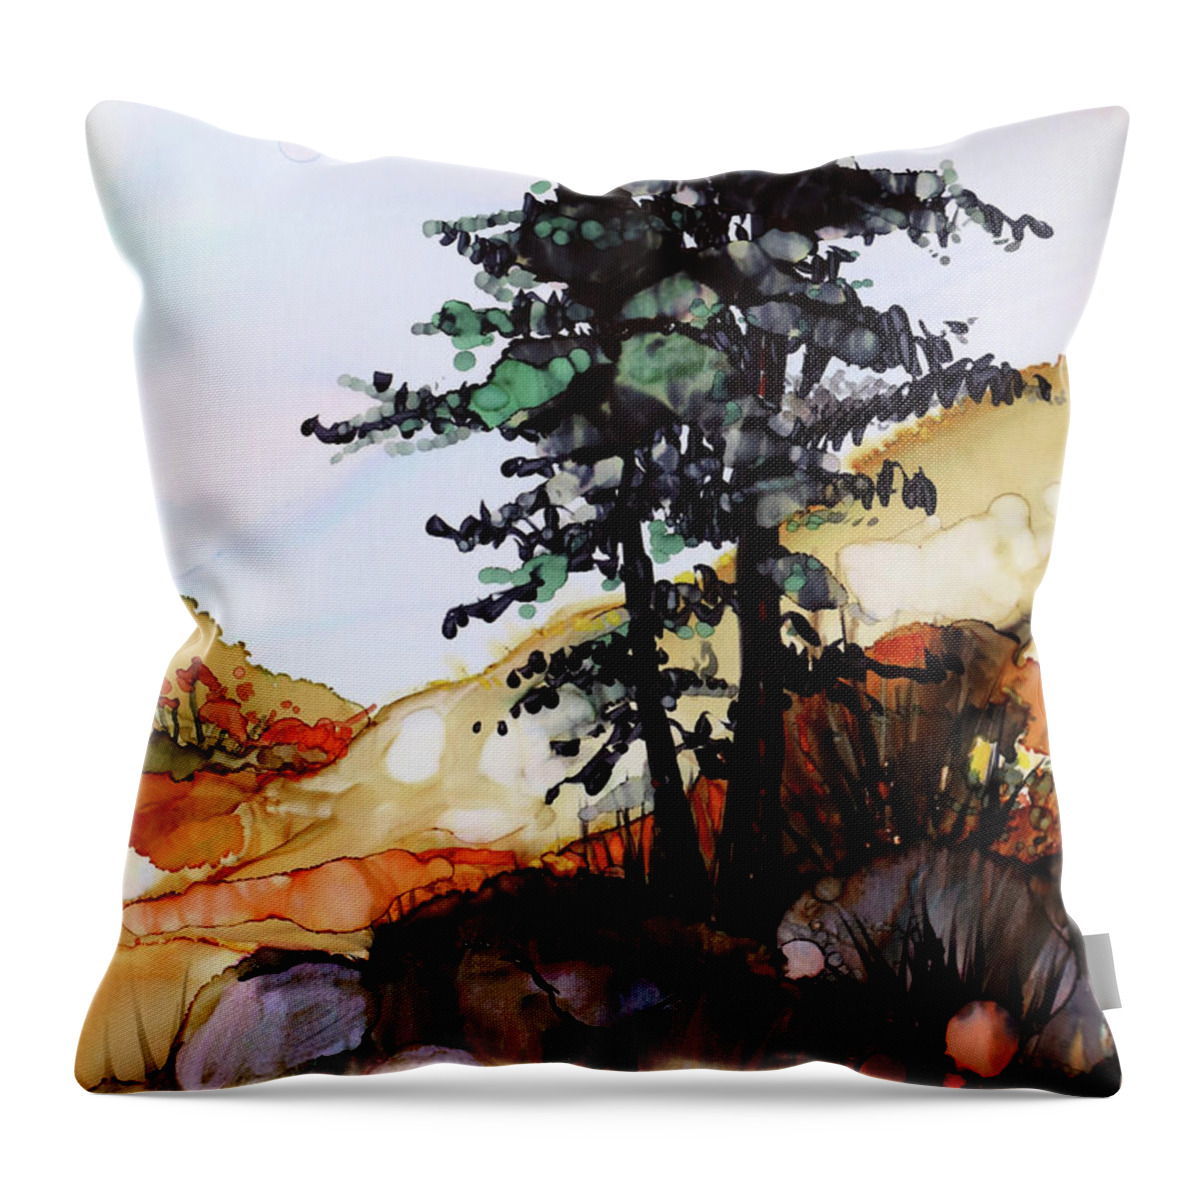  Throw Pillow featuring the painting Tahoe by Julie Tibus